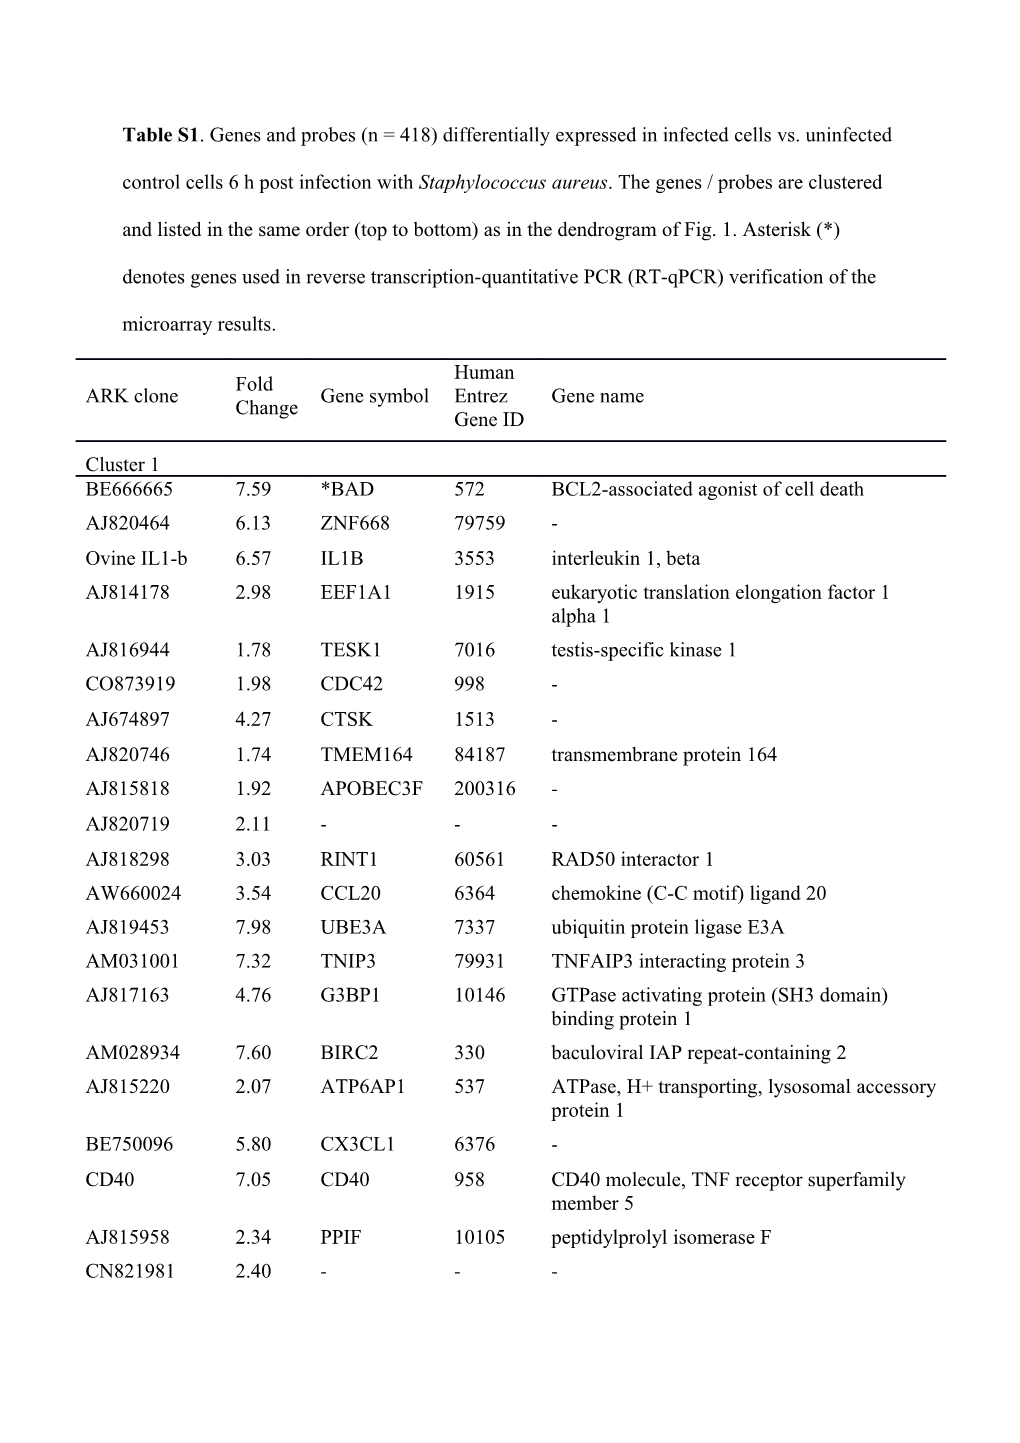 Table S1. Genes and Probes (N = 418) Differentially Expressed in Infected Cells Vs. Uninfected